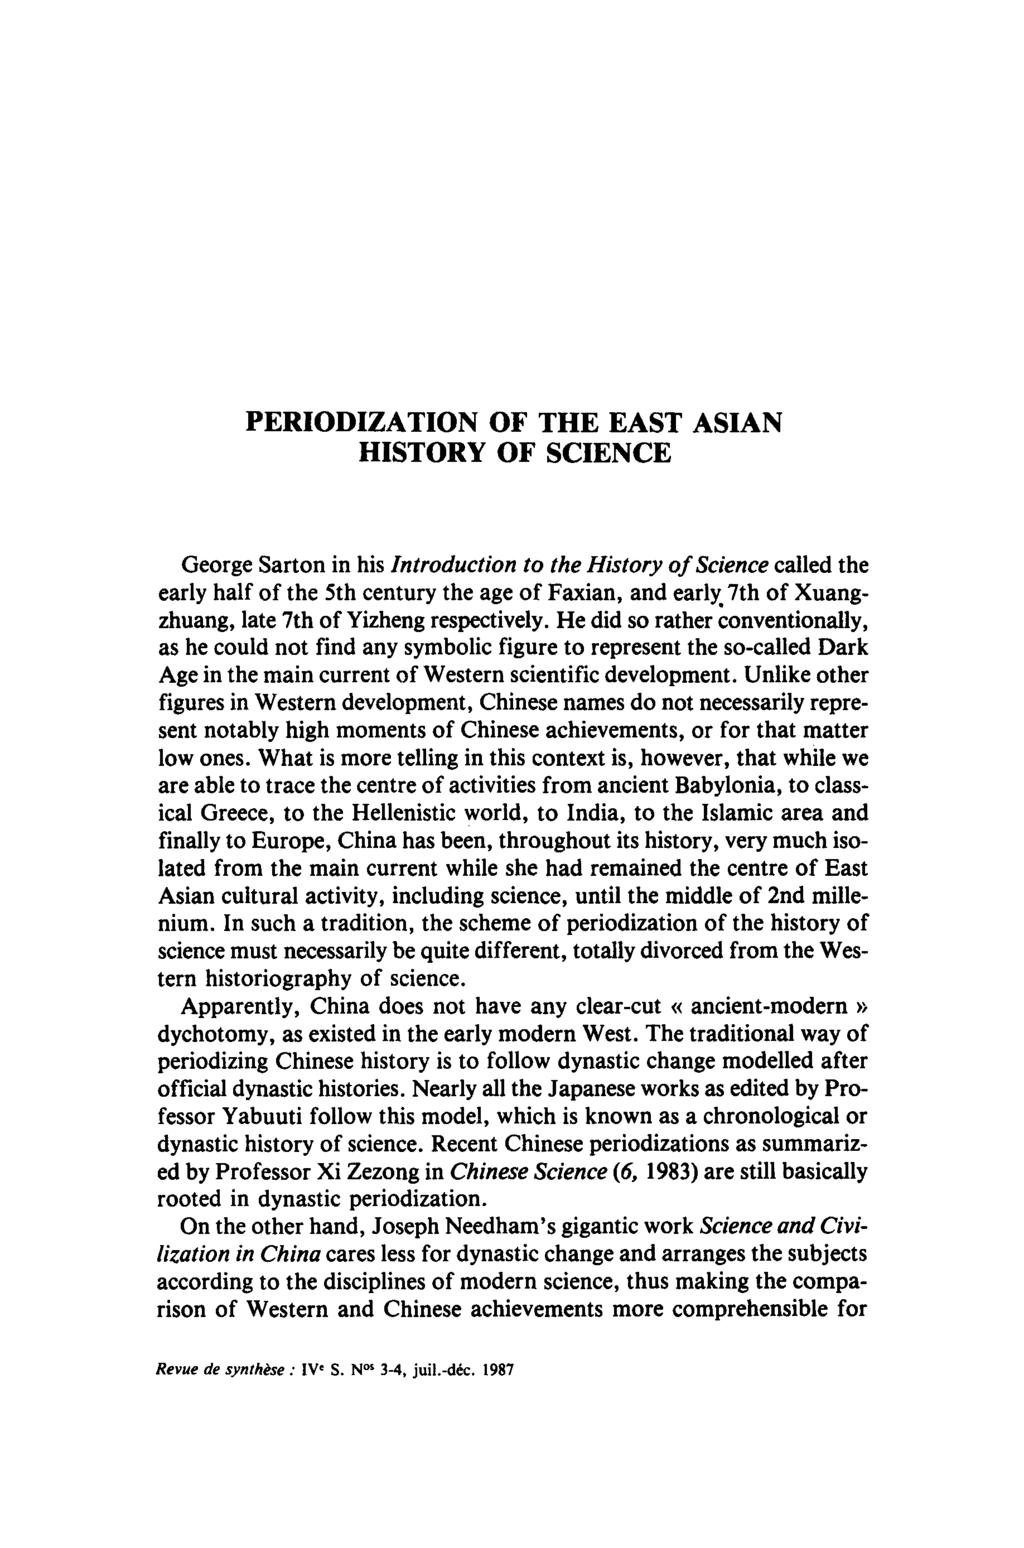 PERIODIZATION OF THE EAST ASIAN HISTORY OF SCIENCE George Sarton in his Introduction to the History of Science called the early half of the 5th century the age of Faxian, and early 7th of